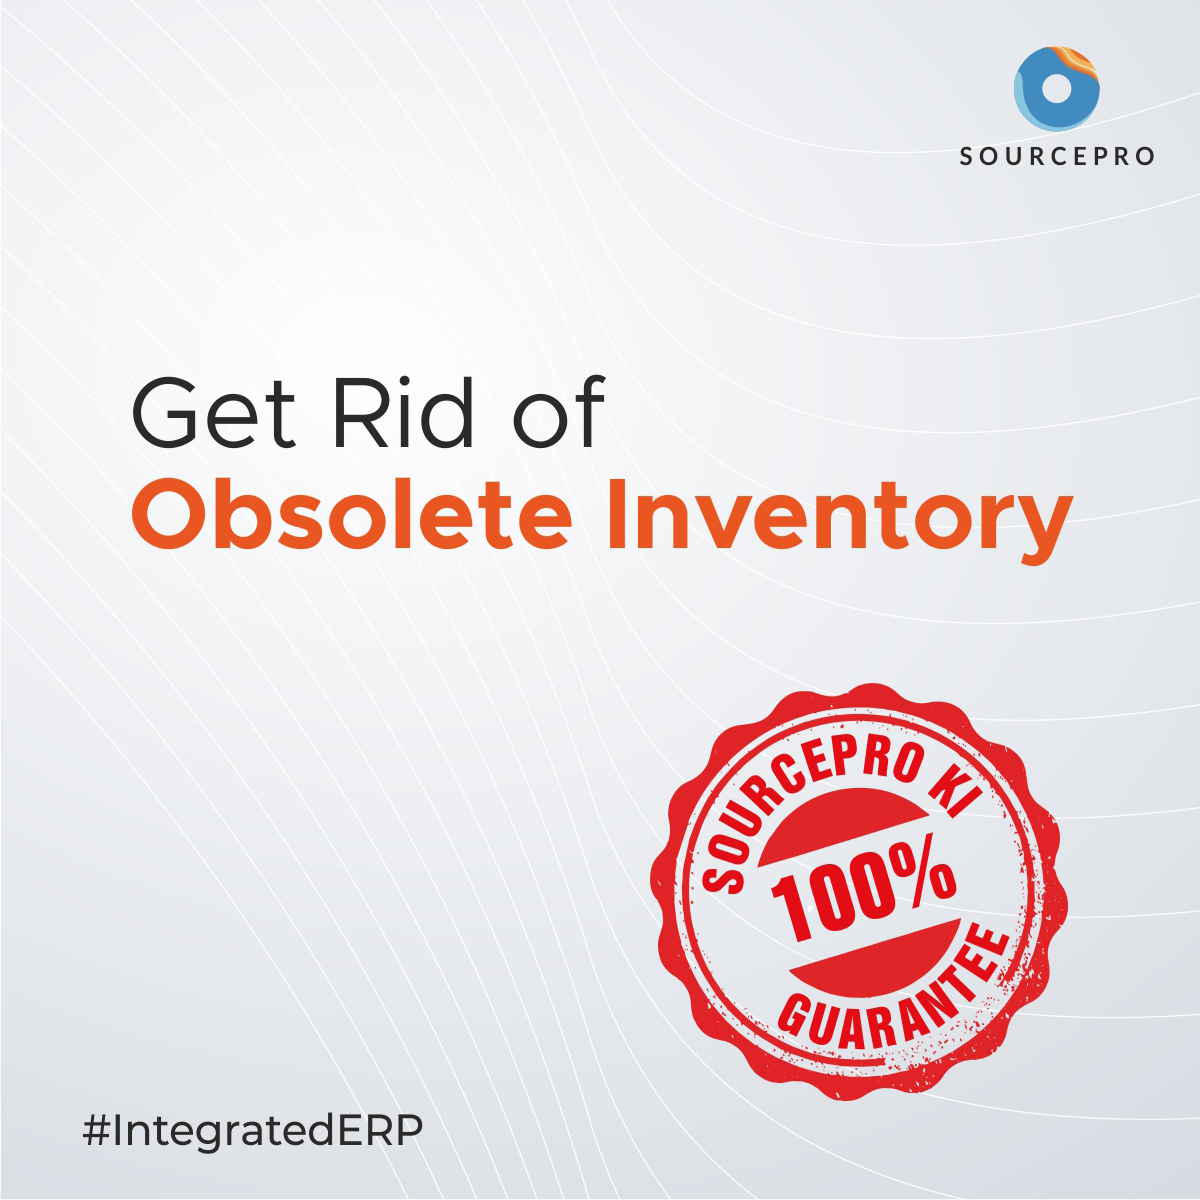 Out with the old, in with the sold! 
Say goodbye to obsolete inventory and hello to increased profits.
.
.
.
.
.
.
#erpsolution #profits #inventory #outdated #obsolete #erpsoftware #technology #softwarecompany #itcompany #increasedprofits #solution